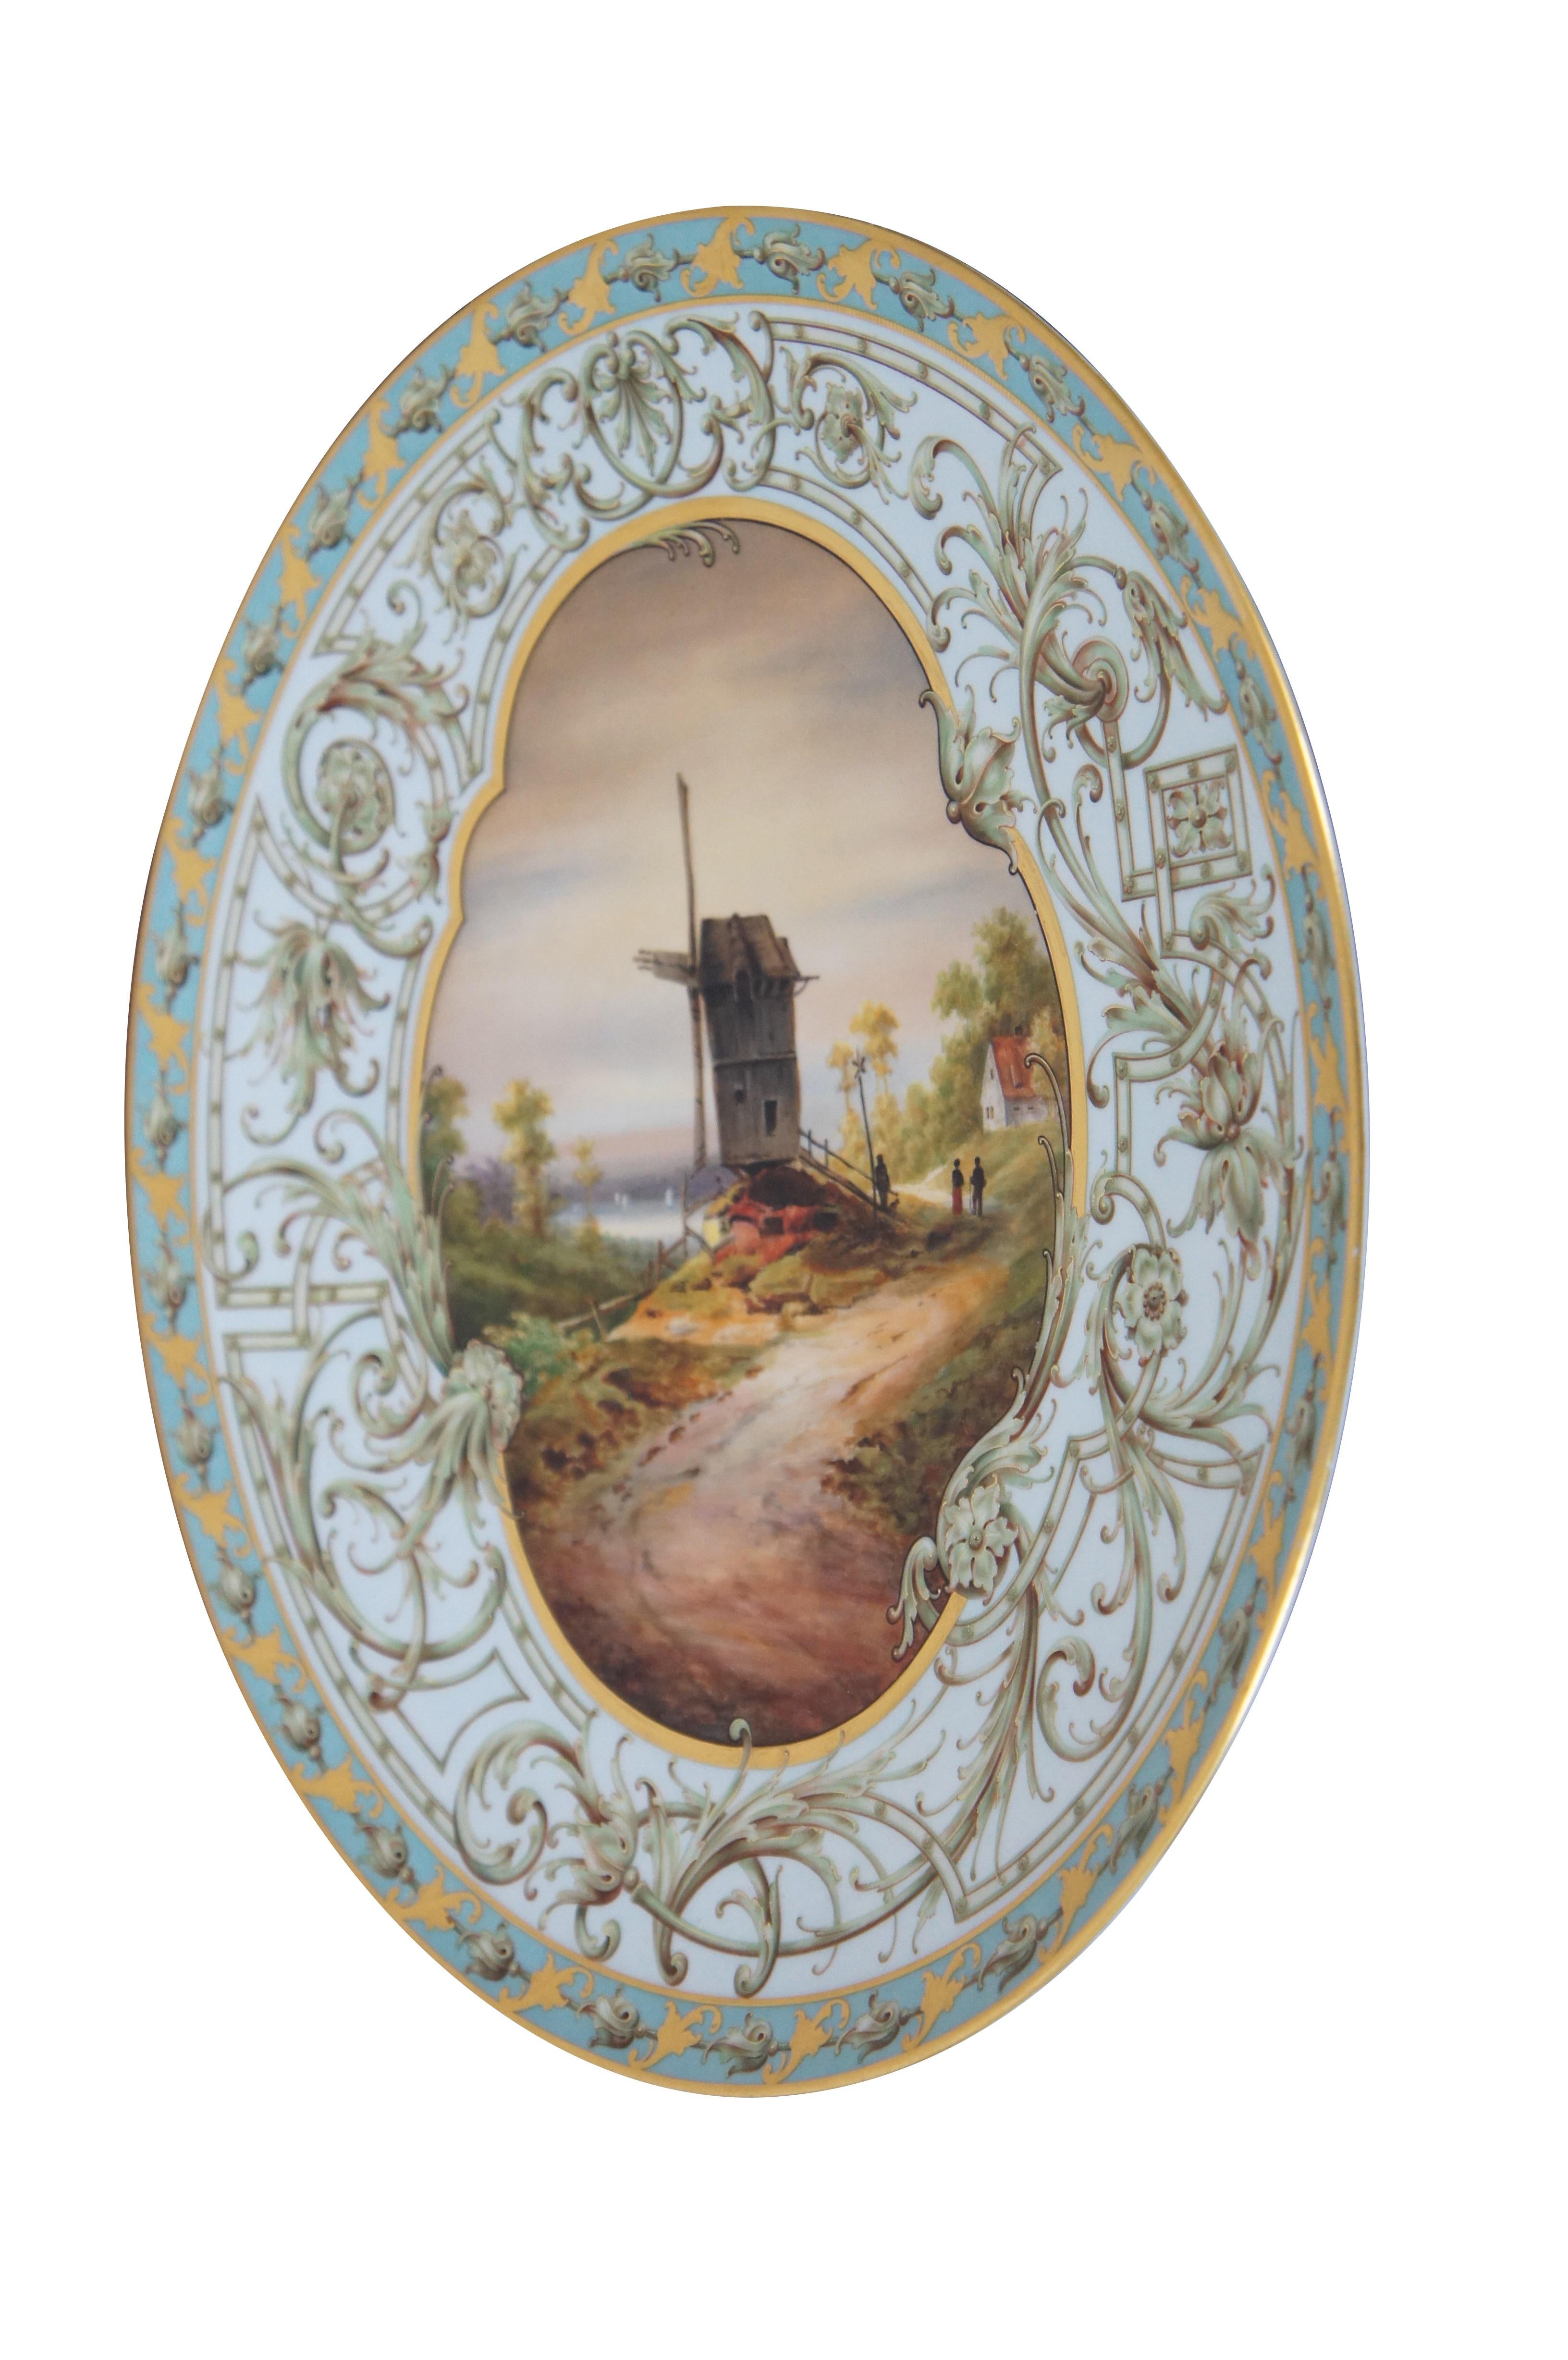 Rare antique KPM Berlin porcelain dinner plate, platter or charger featuring central landscape scene that of a windmill, figures, and sailboats surrounded by Art Nouveau design of floral swags / leaves in gold gilt and teal. 

“The Royal Porcelain